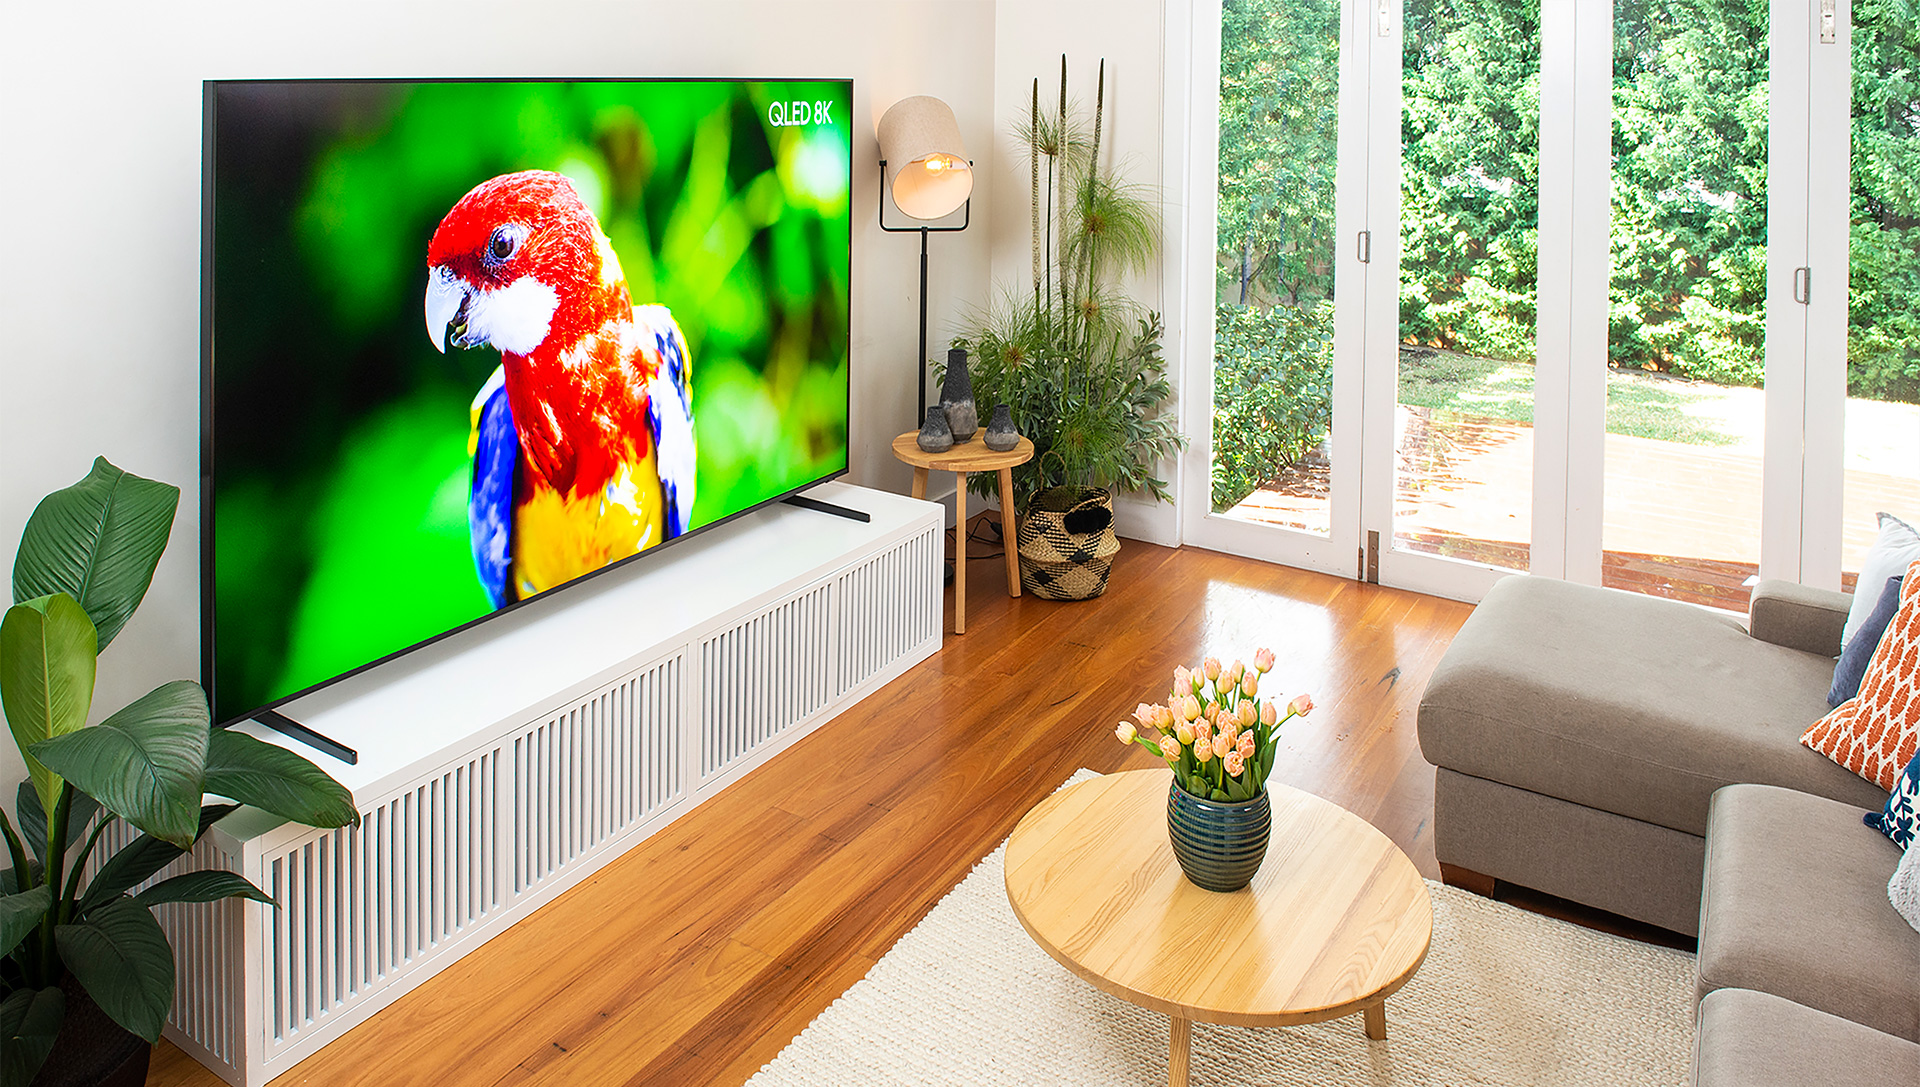 QLED TVs often throw in other premium features too, like 8K resolution